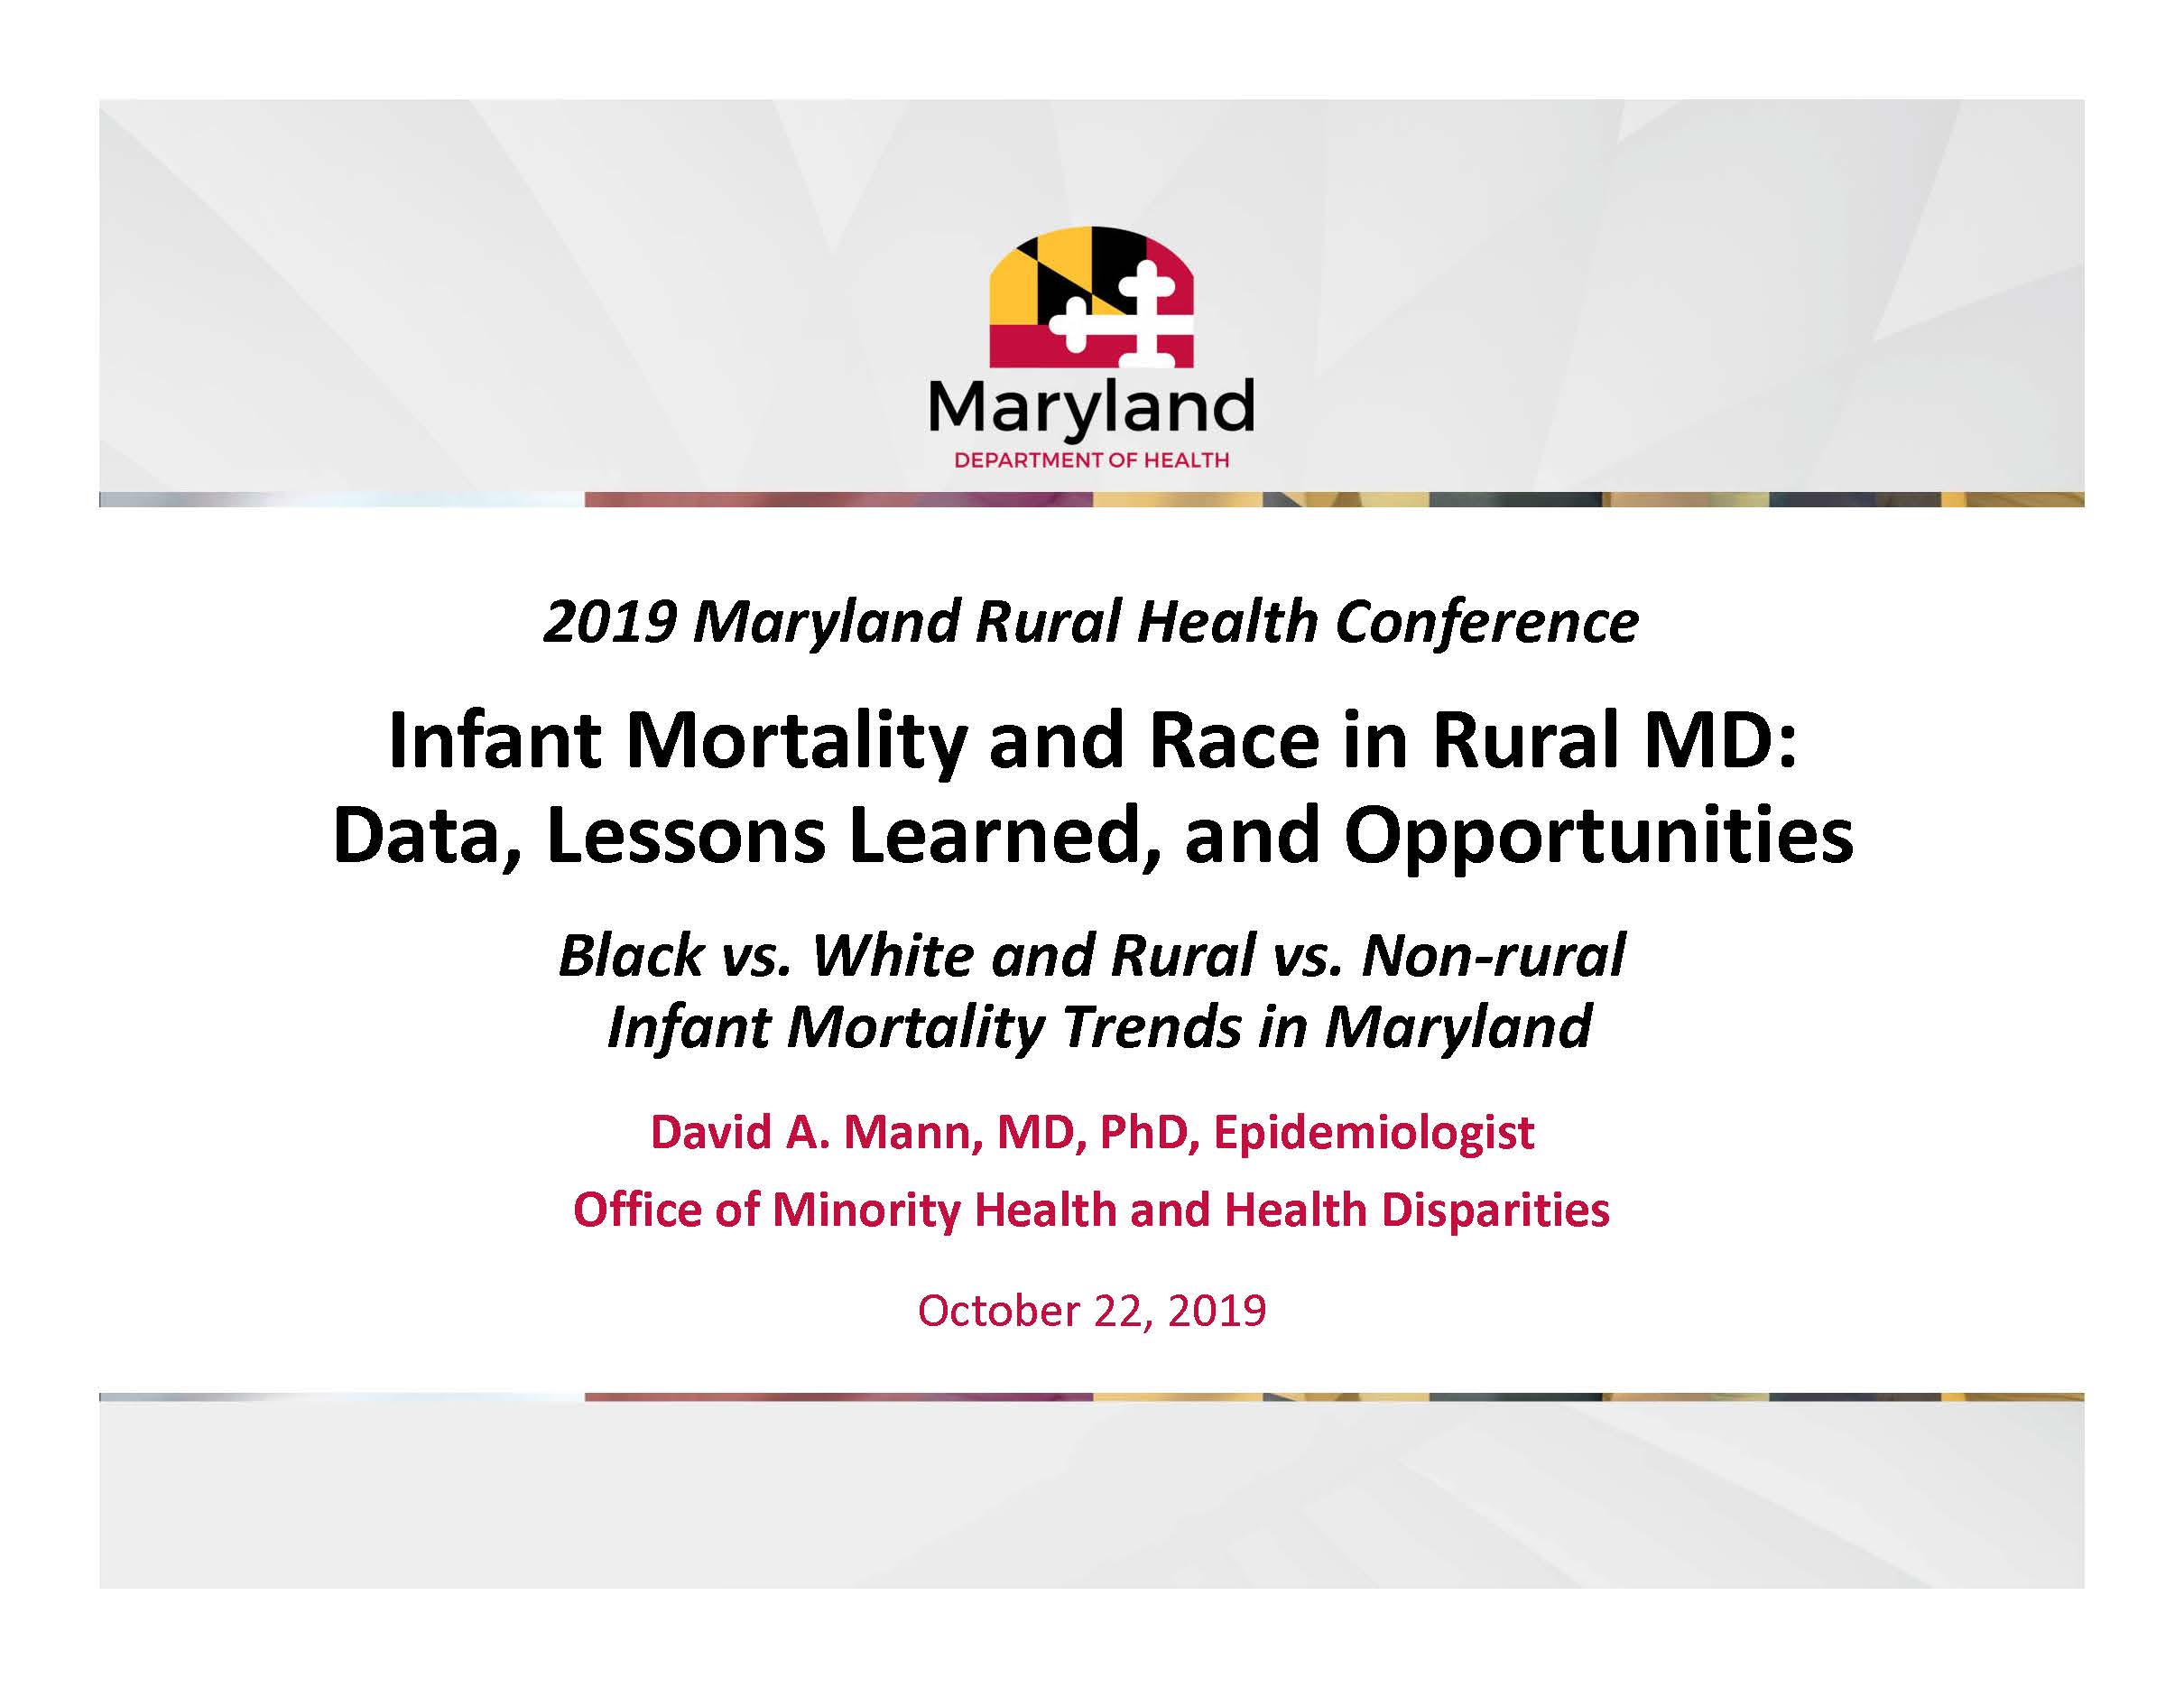 Black and Rural Infant Mortality in Maryland 2019 10 16.jpg